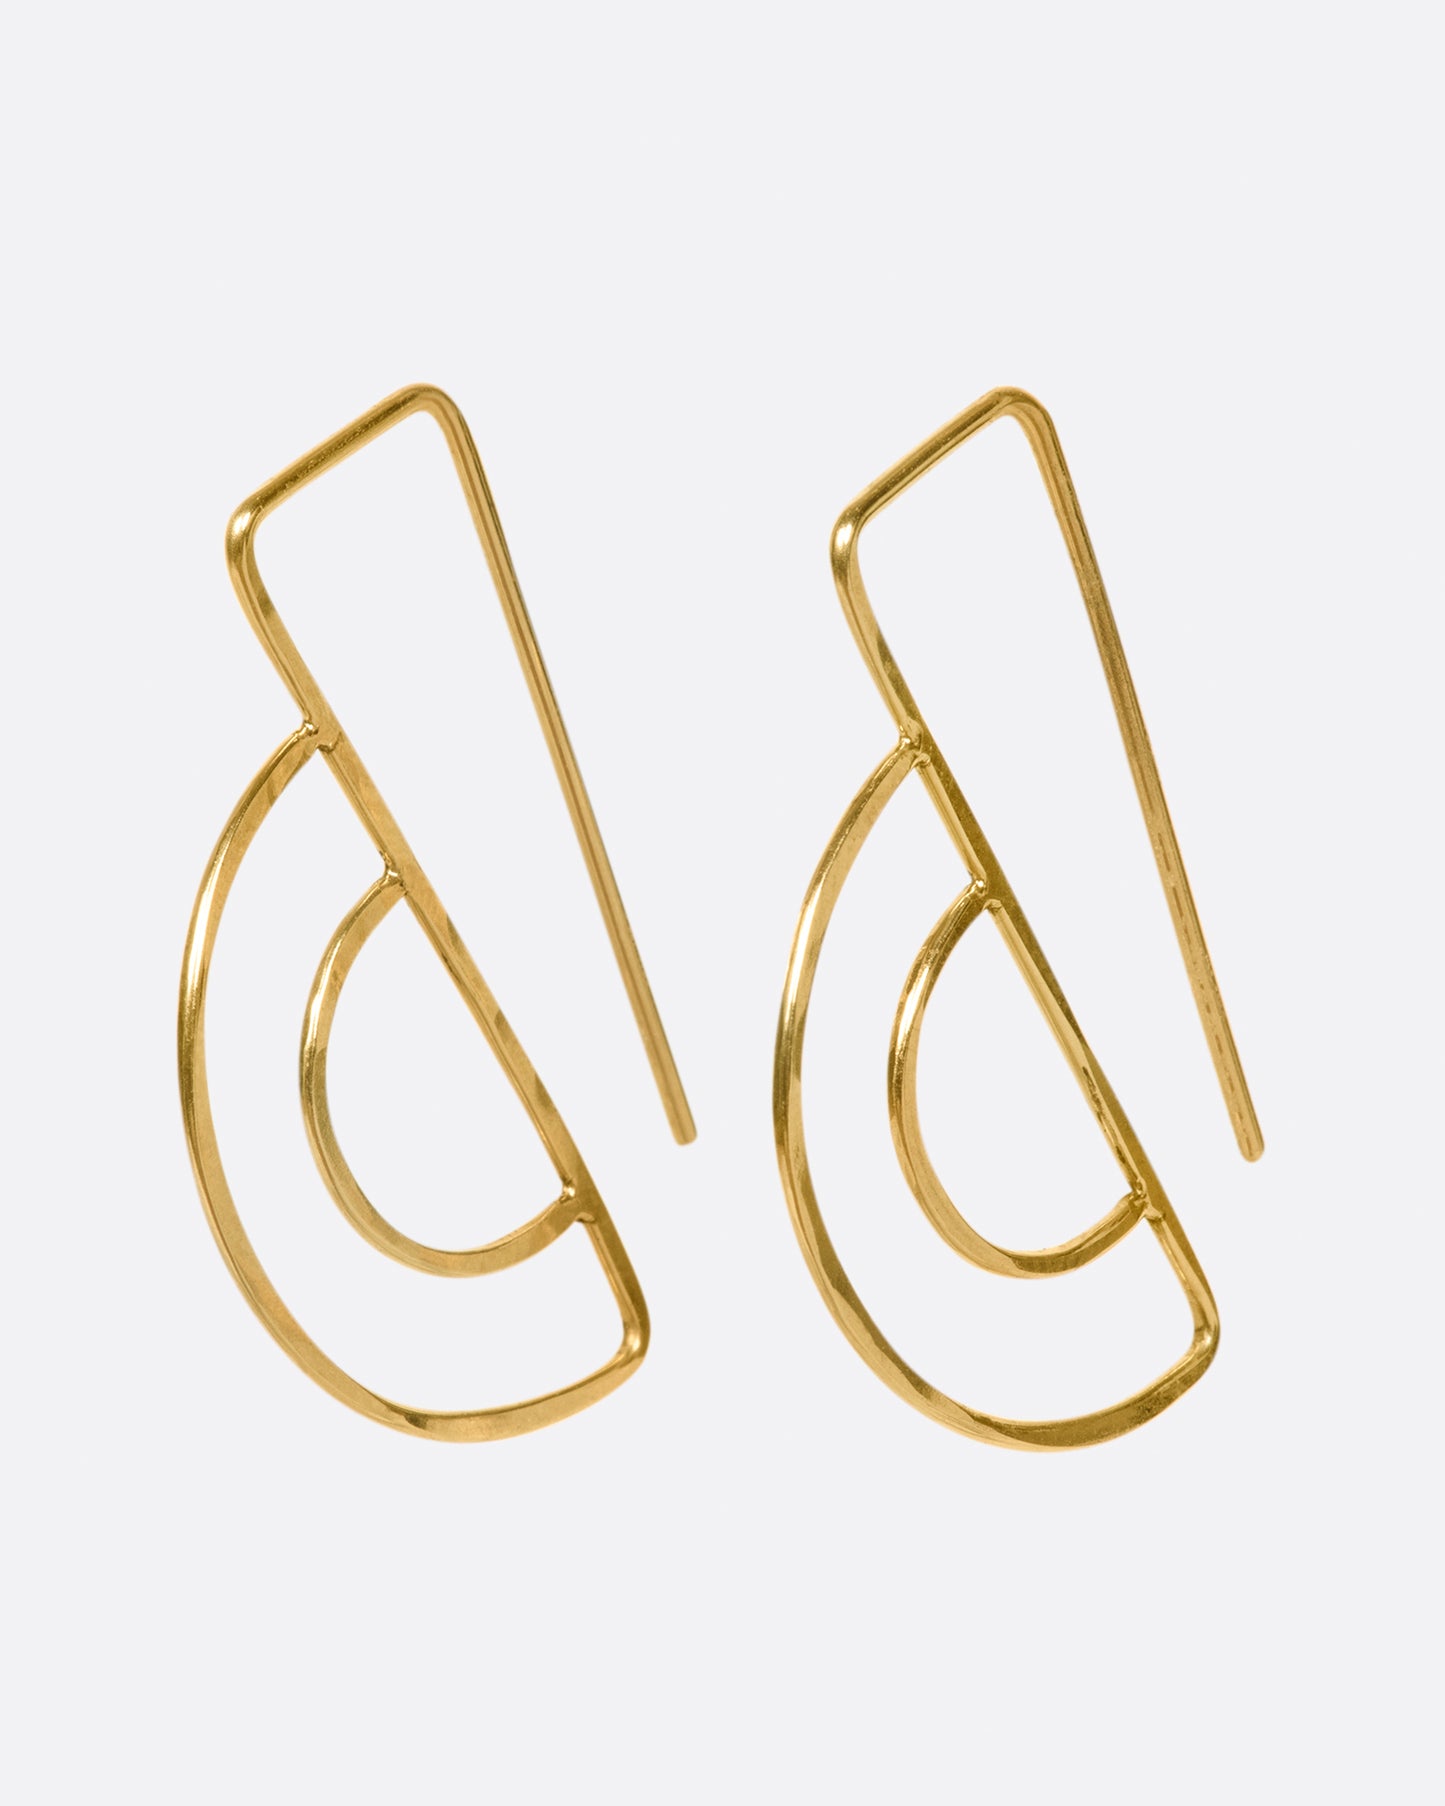 These double semi-circle earrings face forward and the long straight wires hang behind the earlobe; framing the face.